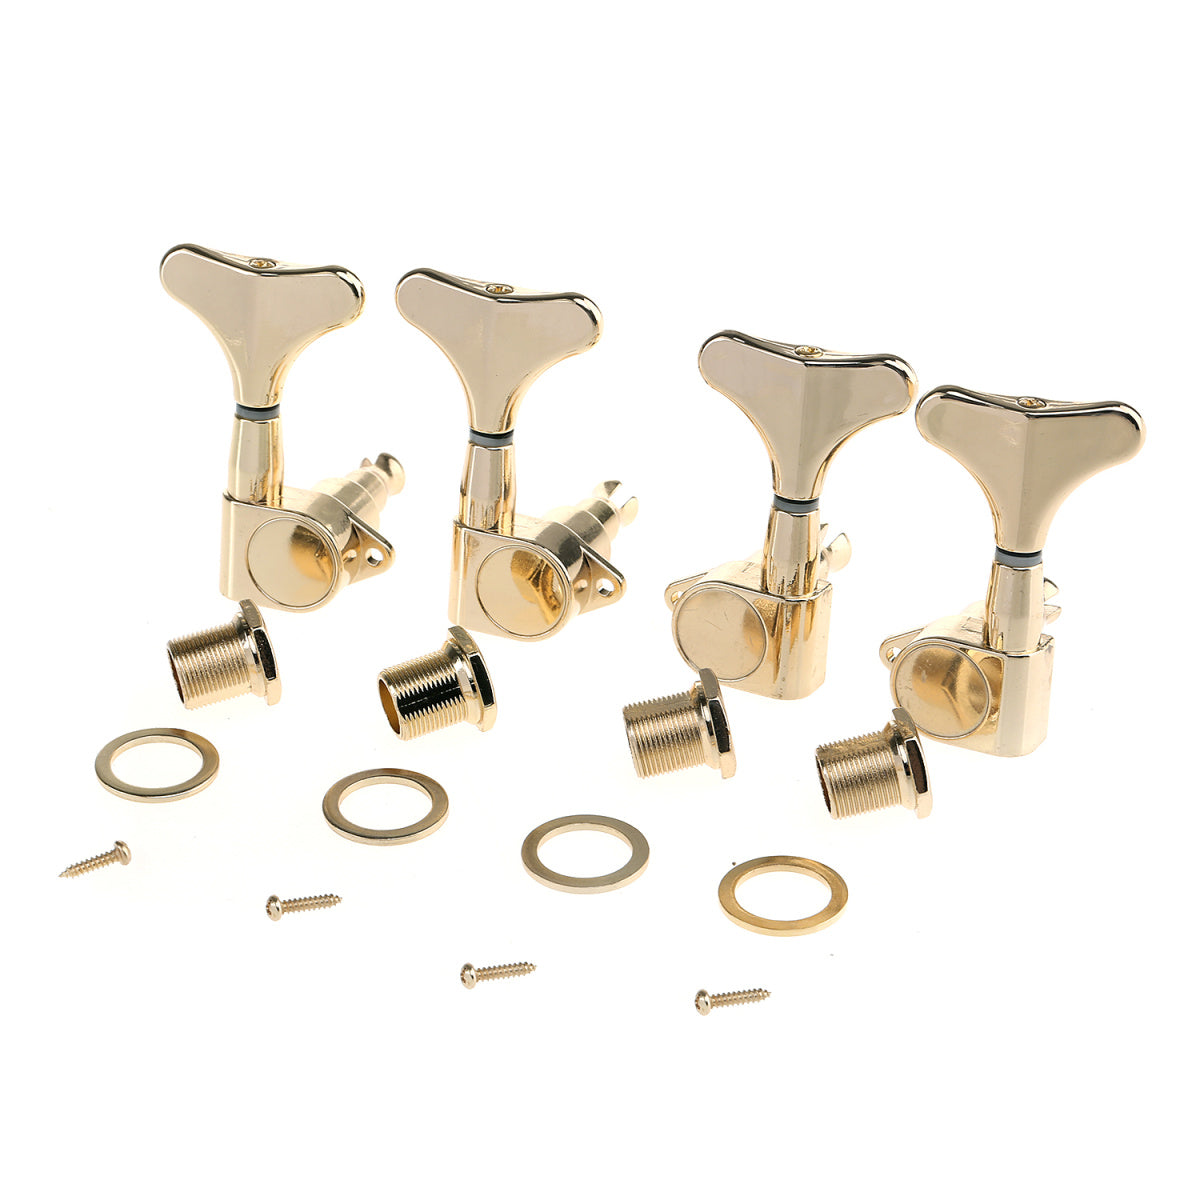 Musiclily Pro 2x2 Sealed Bass Tuners Tuning Keys Pegs Machine Heads Set for Precision Jazz Bass, Gold